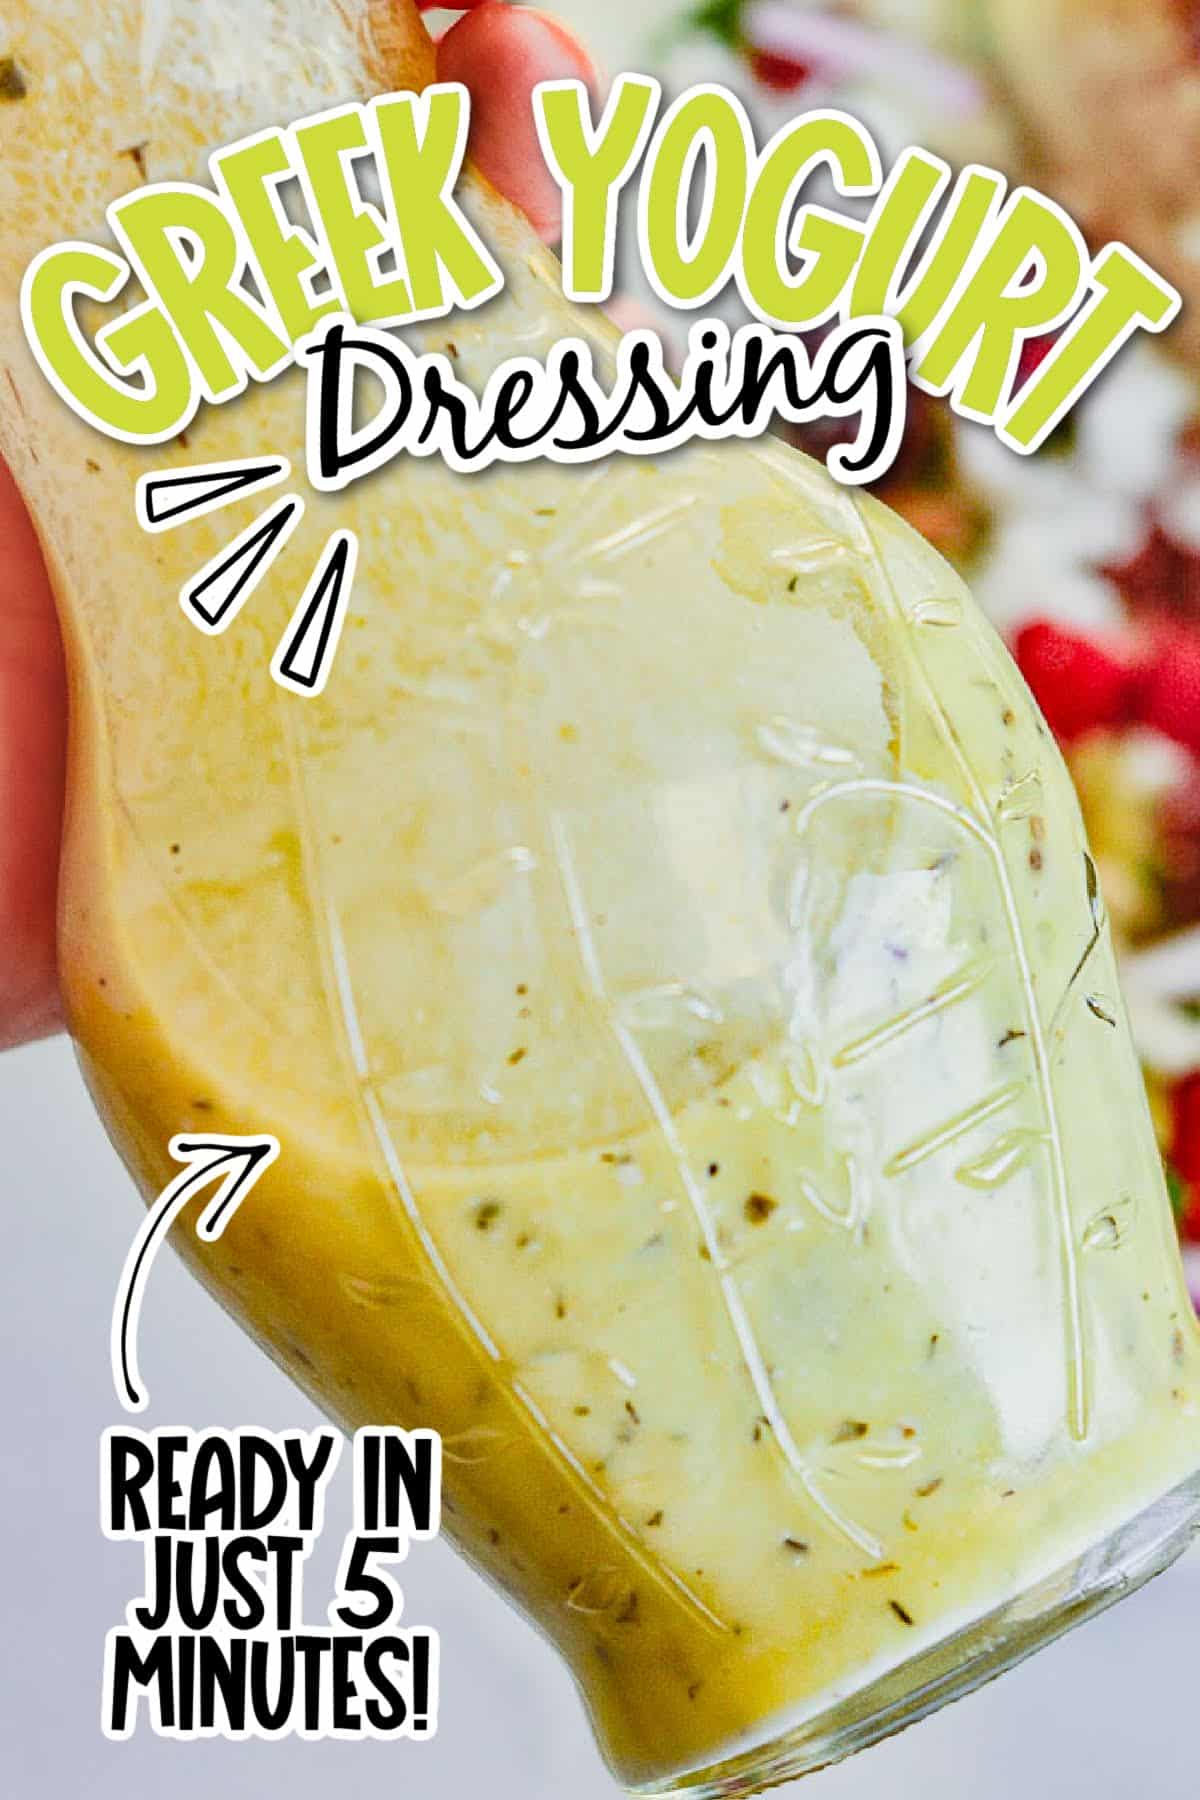 Close up view of Greek Yogurt Dressing in a glass container with text overlay.